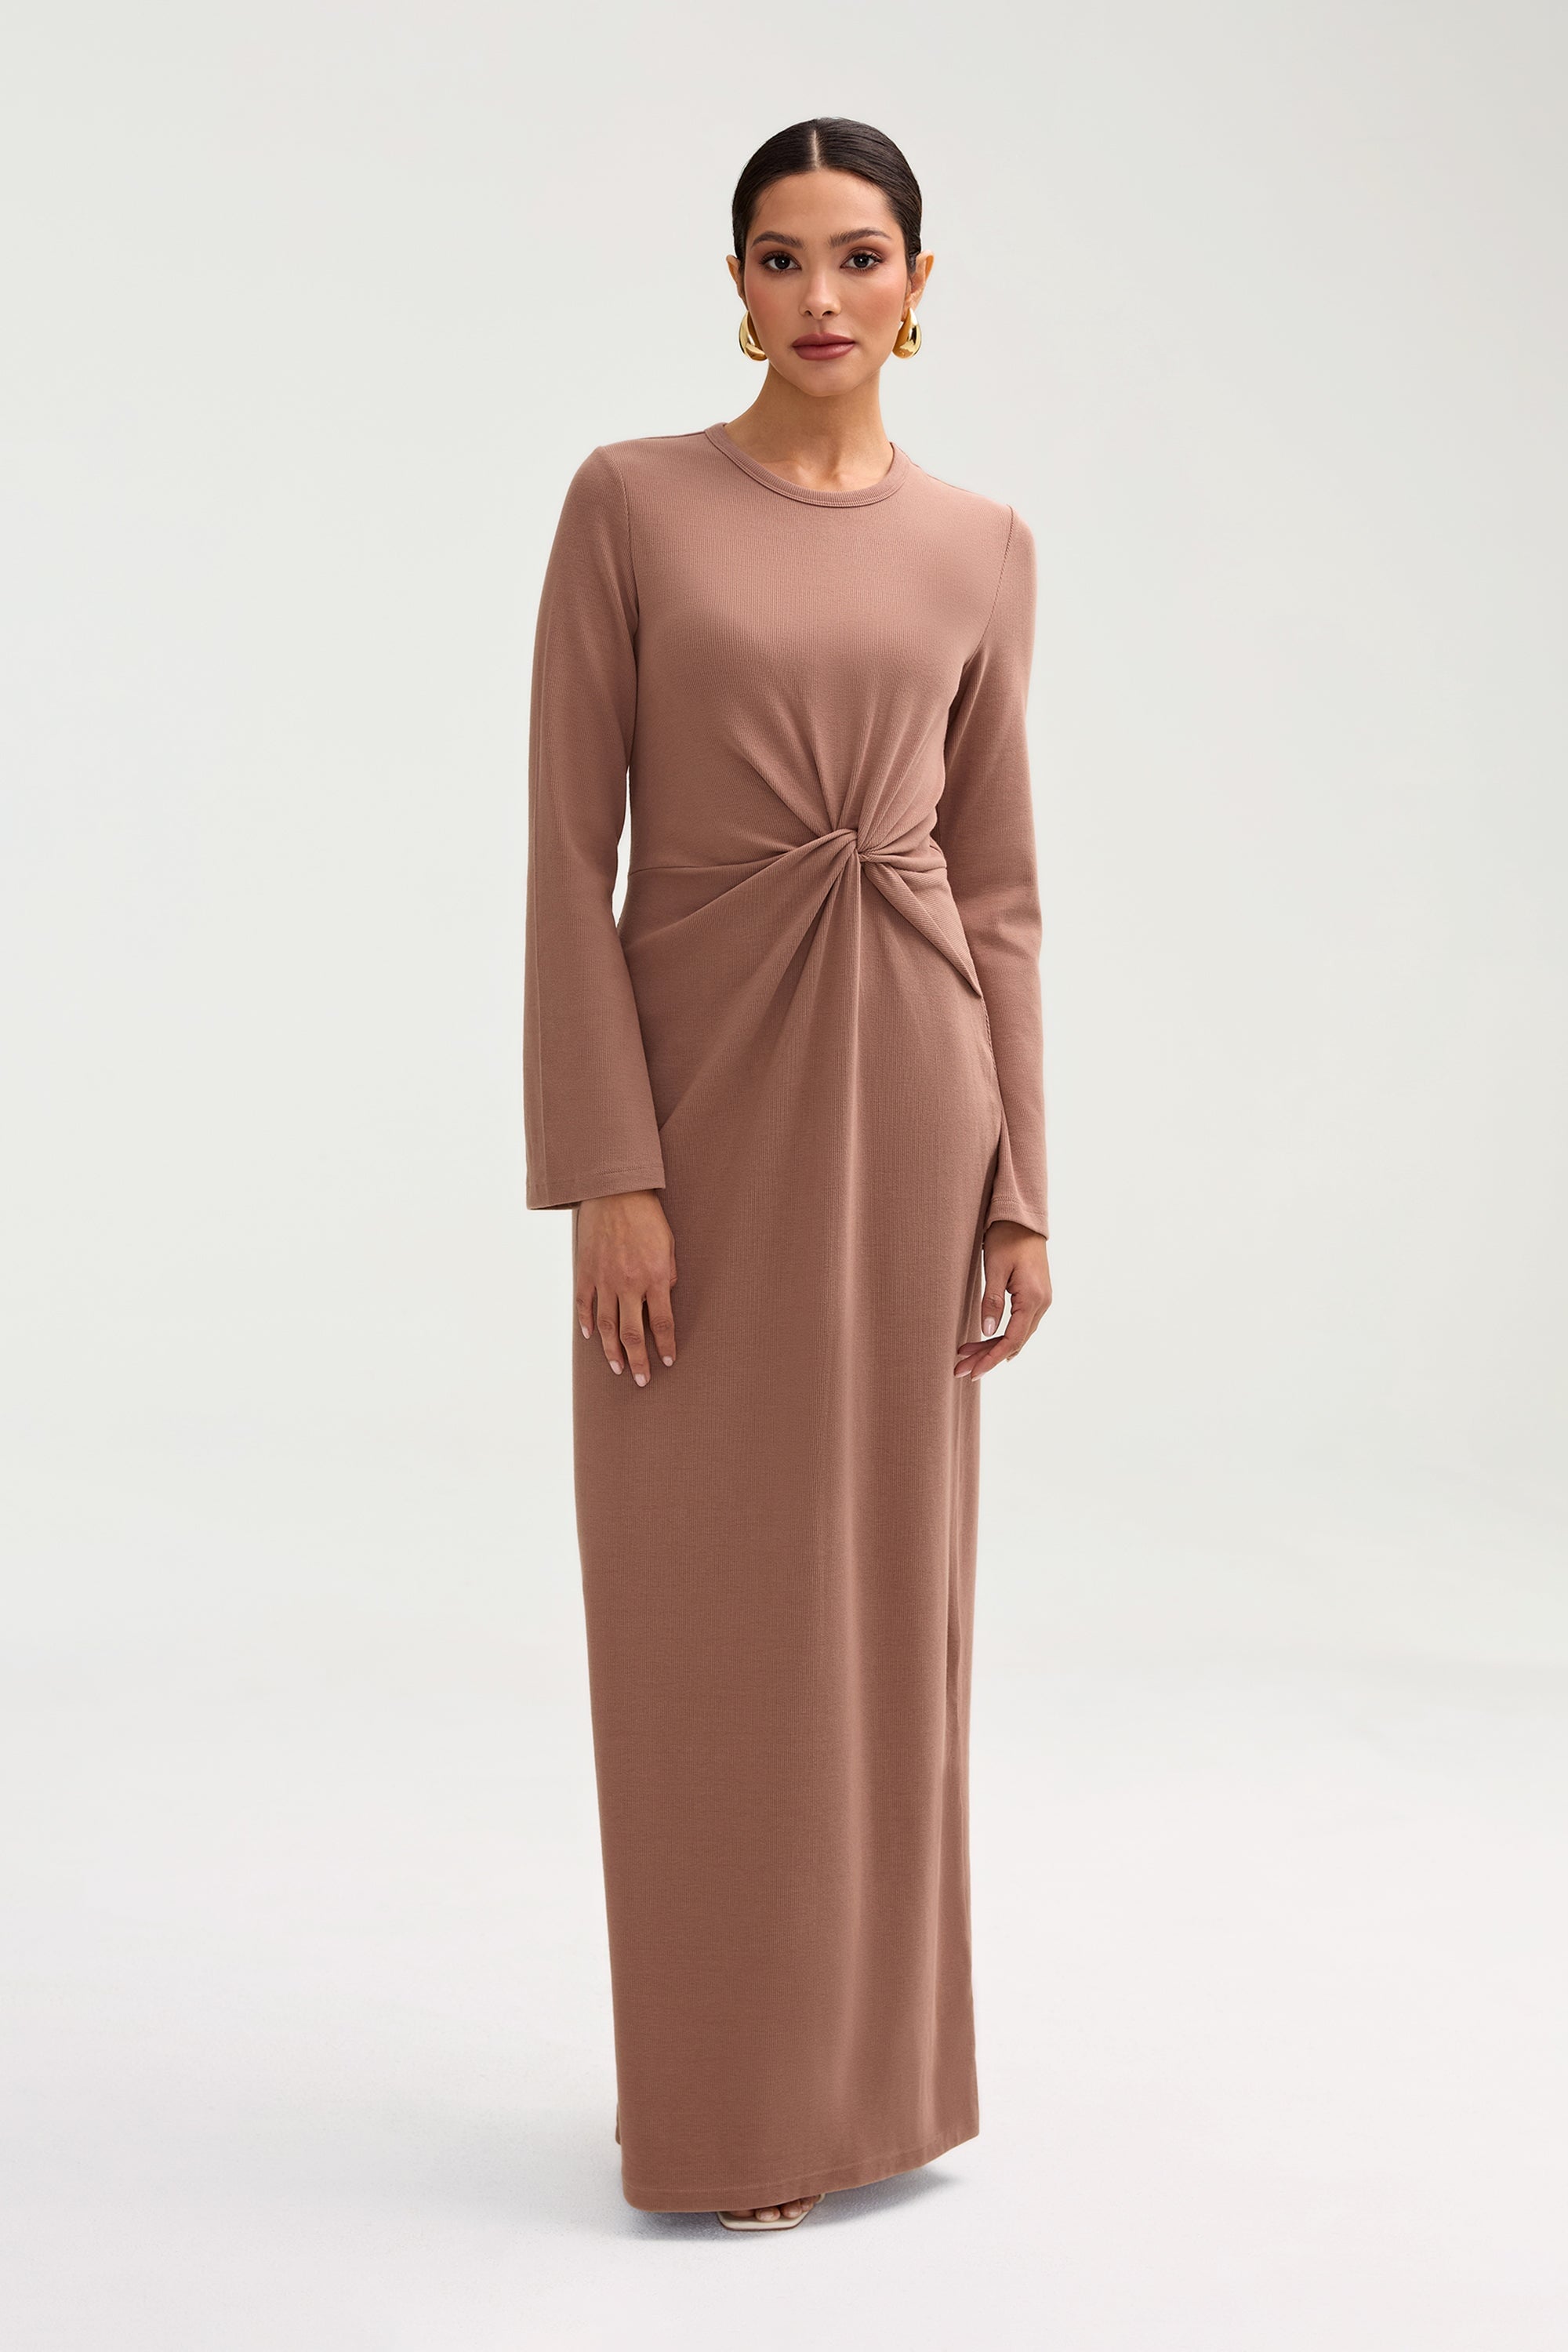 Aissia Ribbed Twist Front Maxi Dress - Brownie Clothing Veiled 